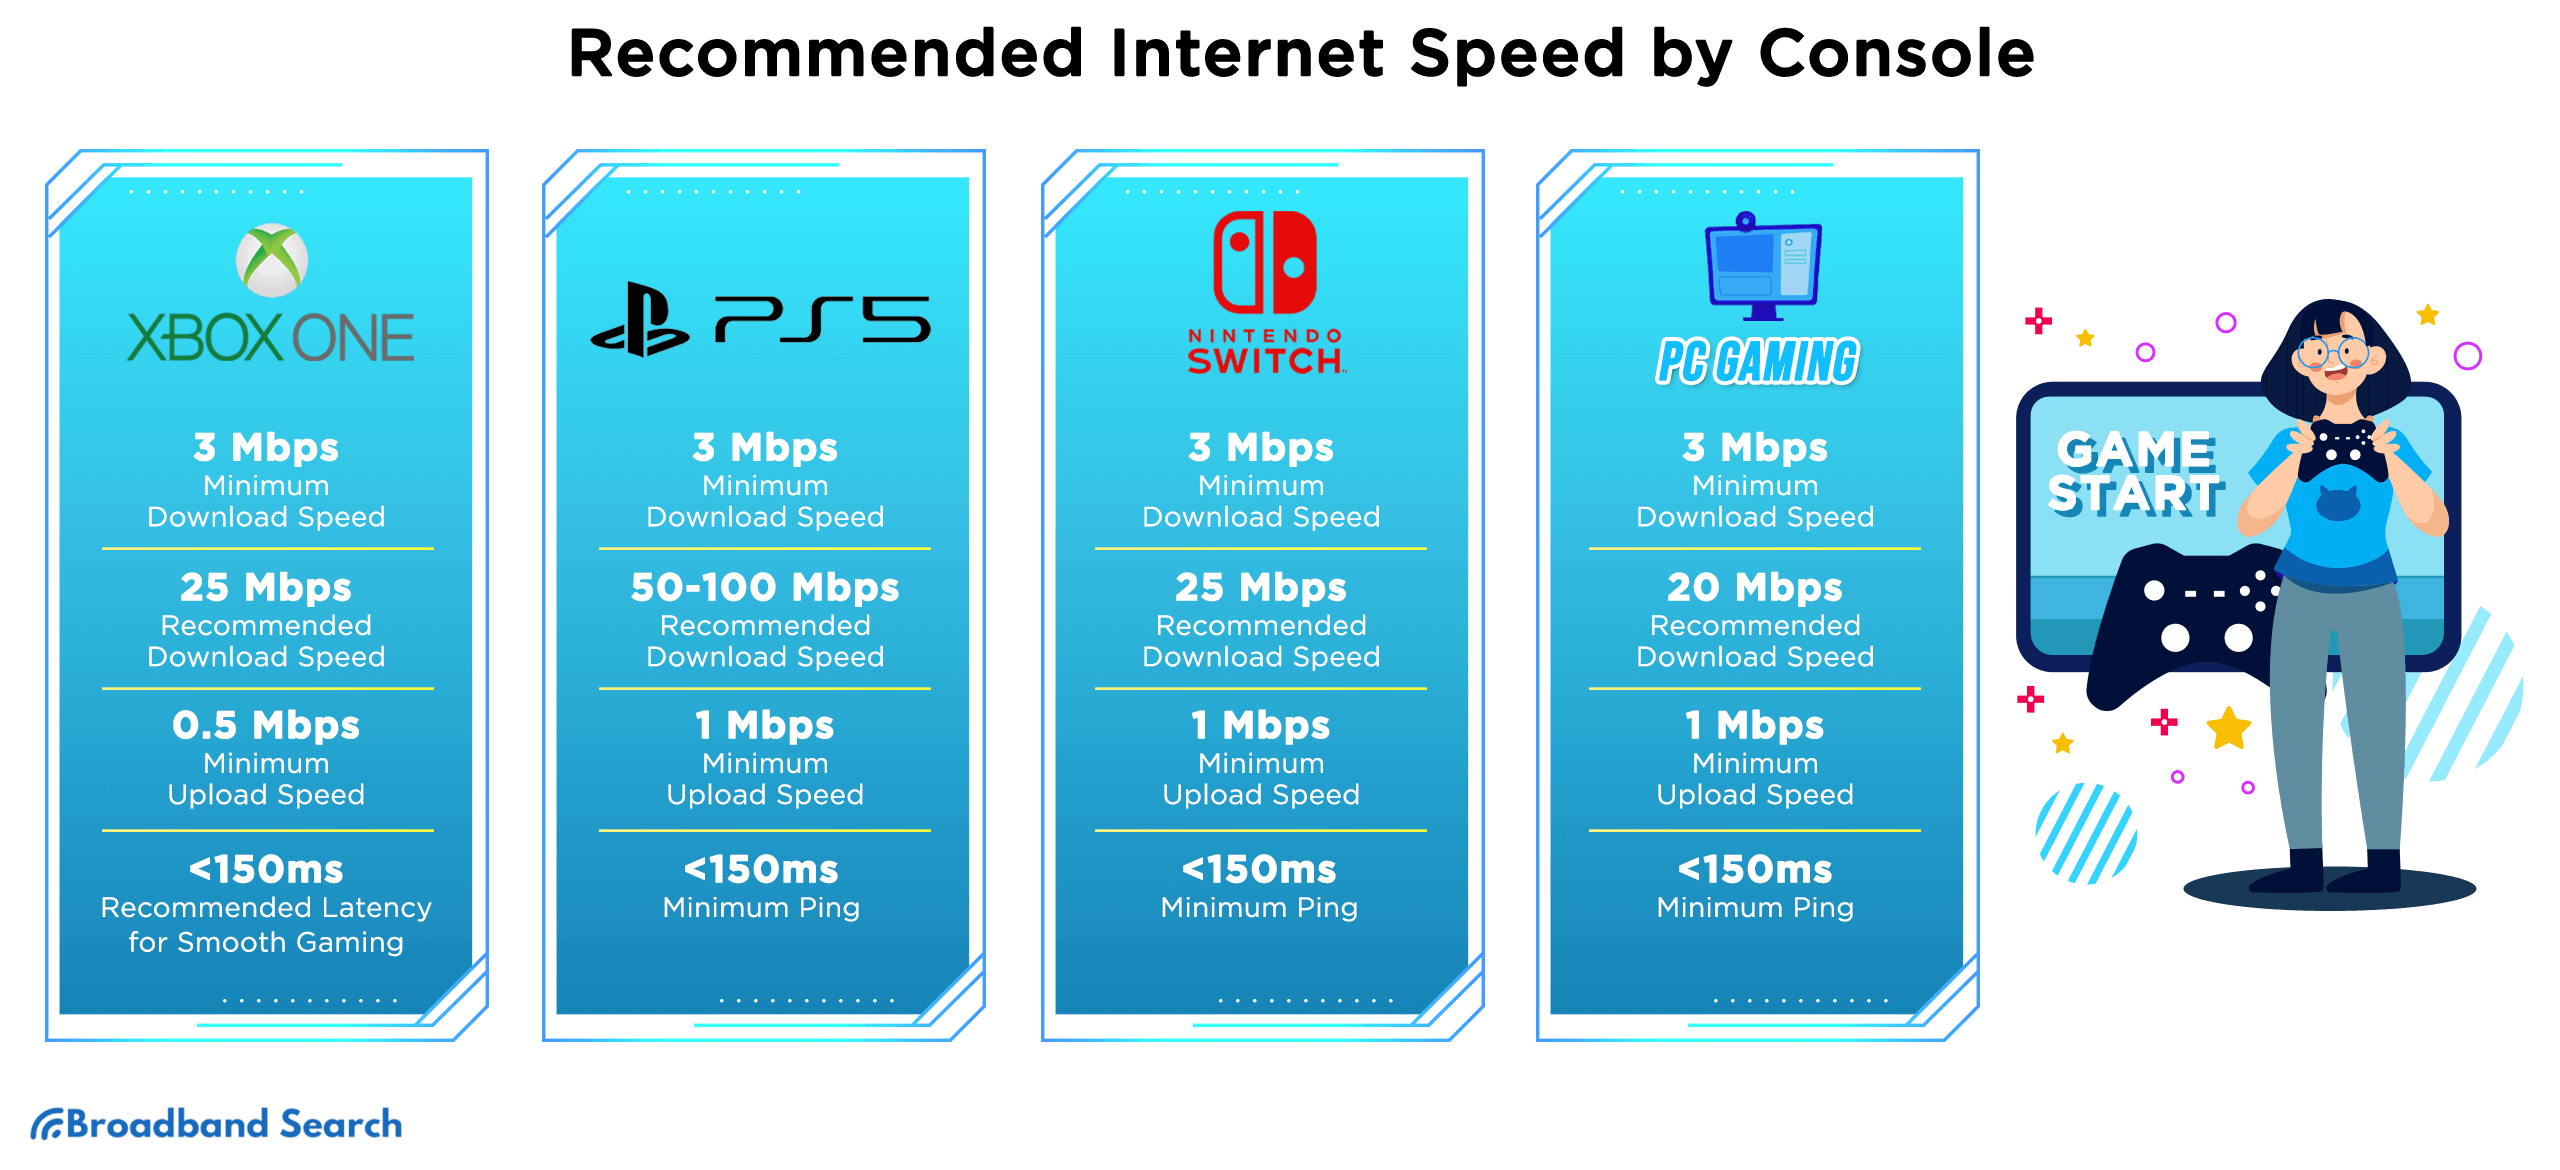 Recommended Internet Speed by Console